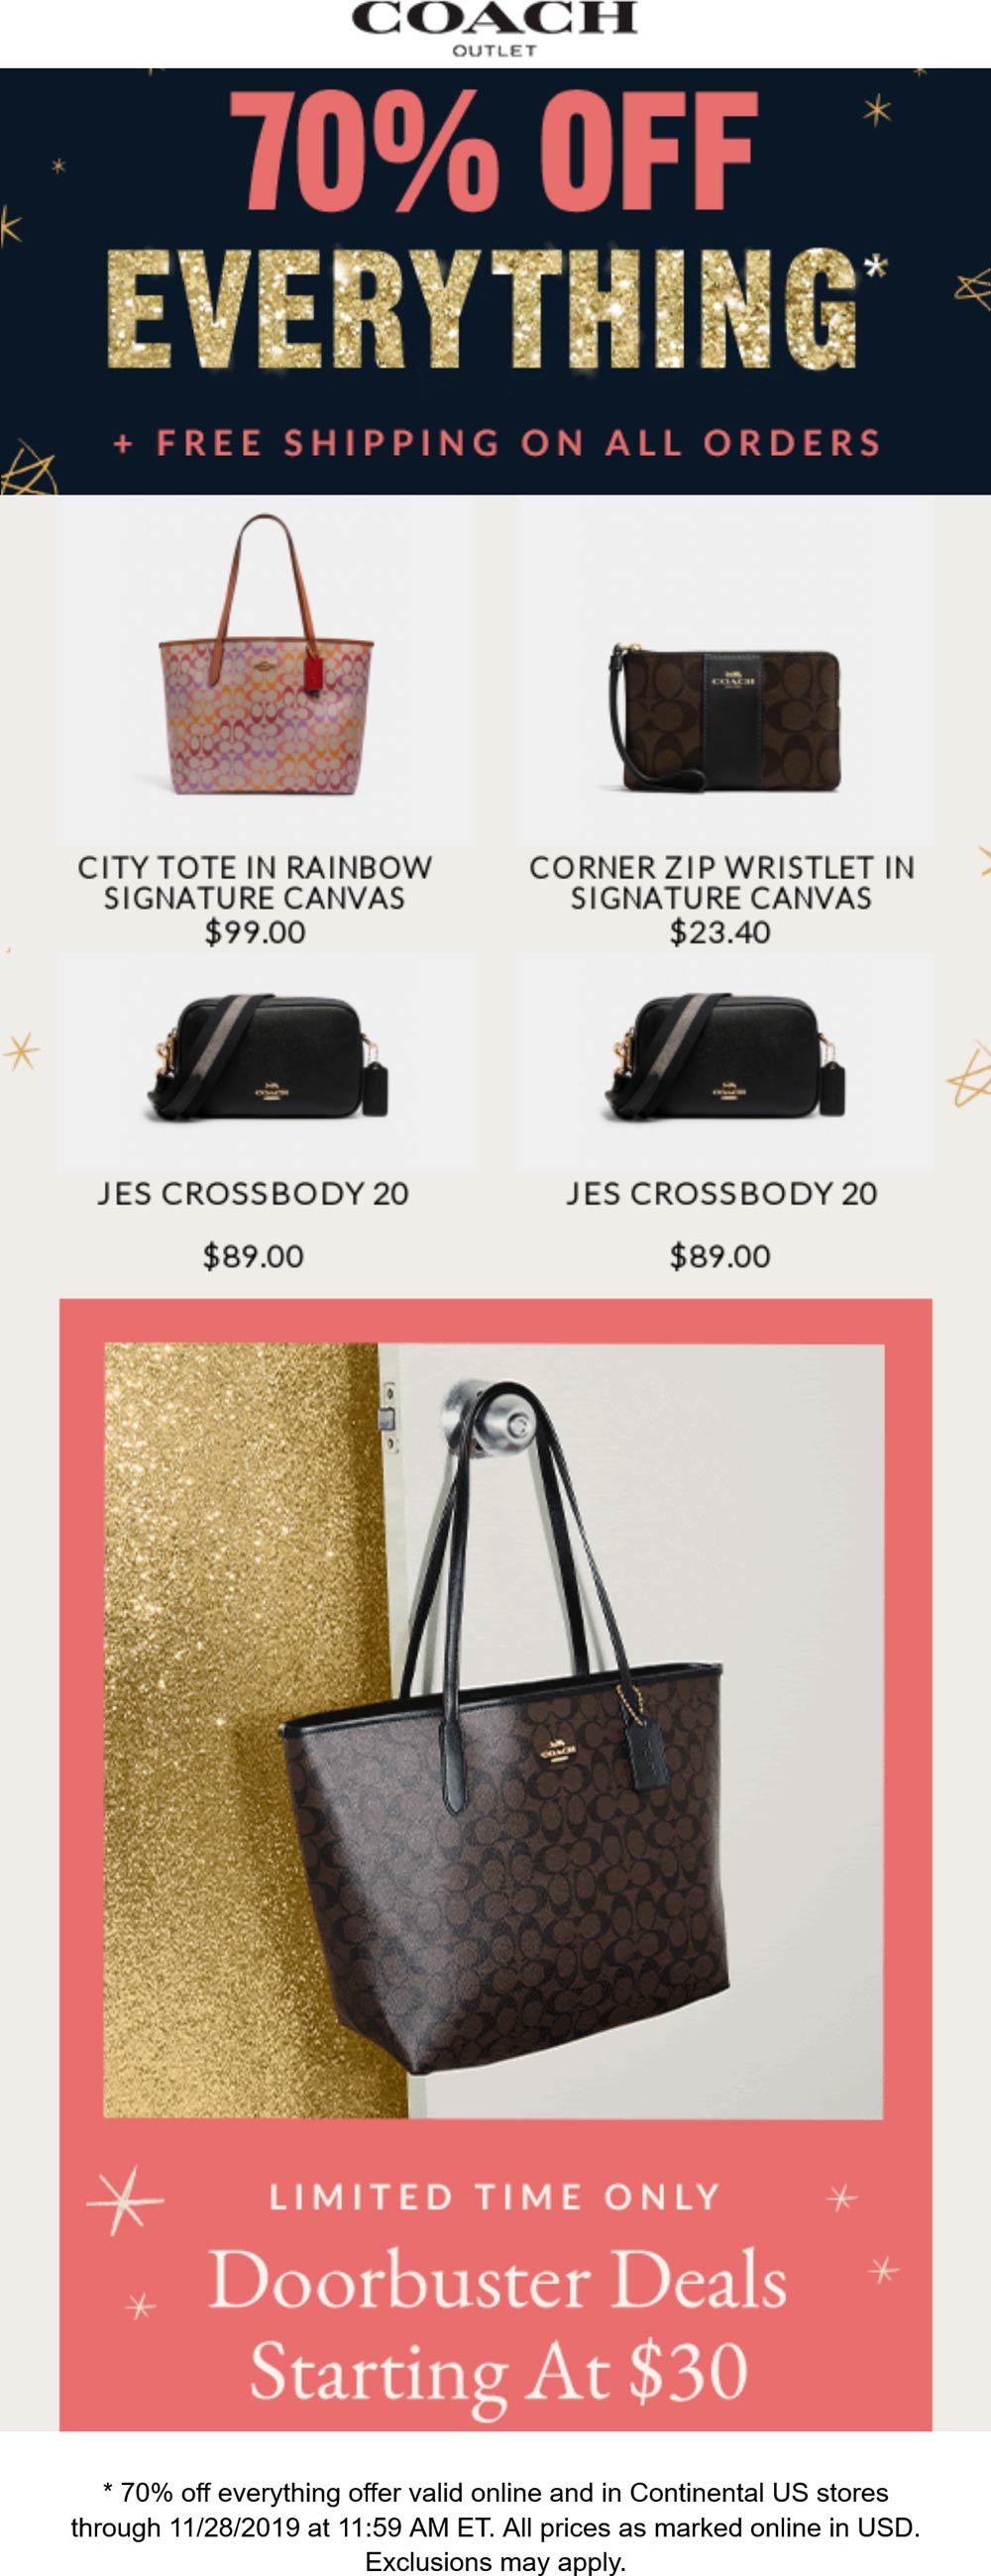 Coach Outlet stores Coupon  70% off everything at Coach Outlet, ditto online #coachoutlet 